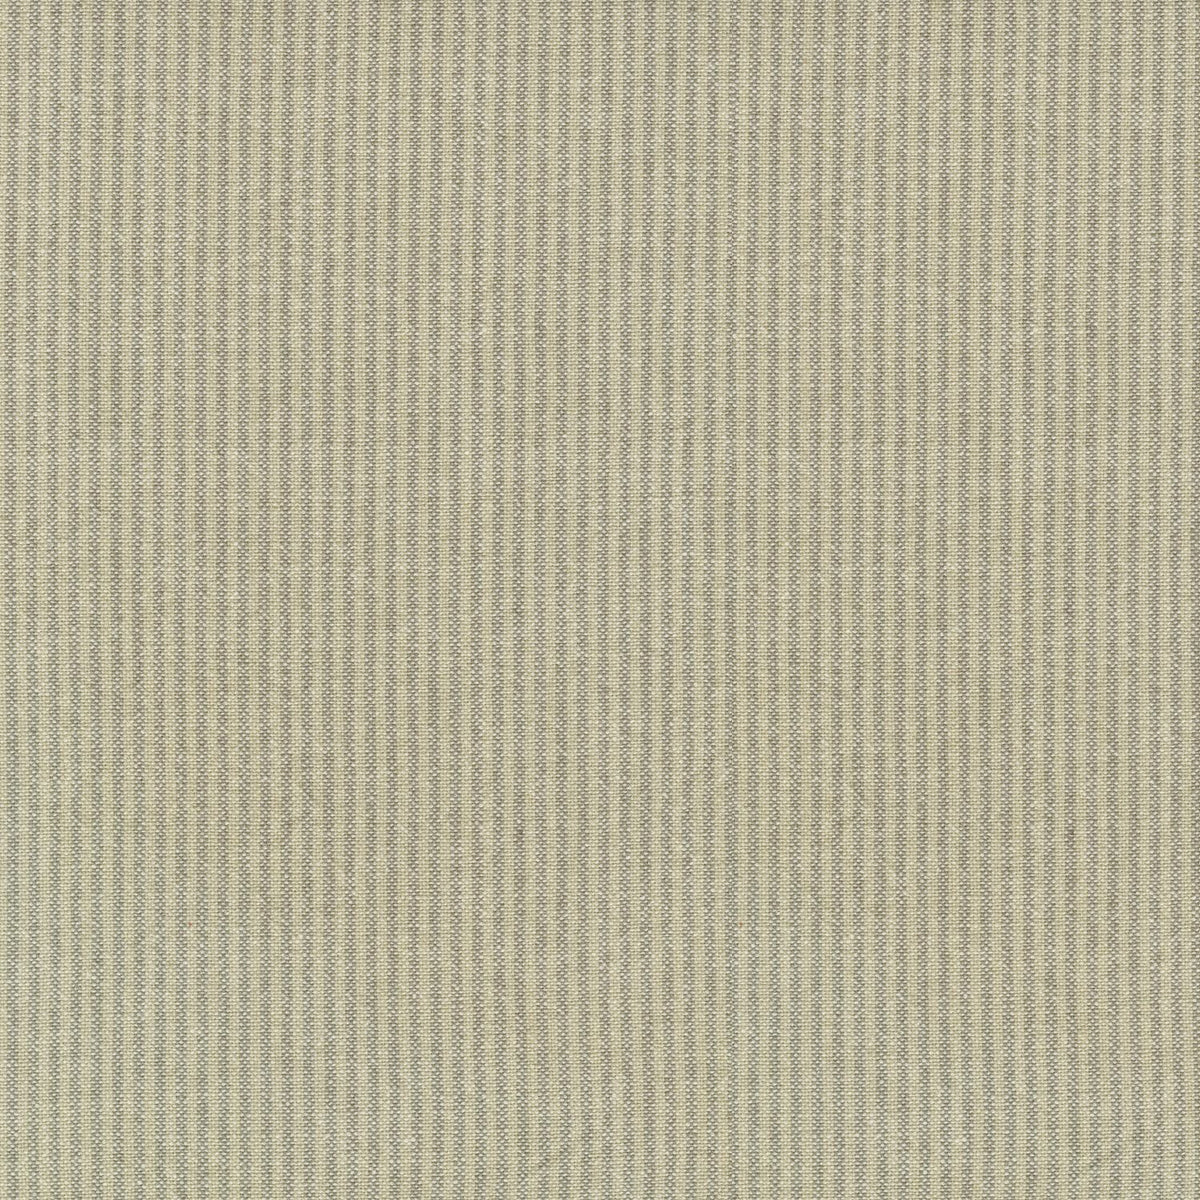 P/K Lifestyles Cullen Ticking - Shale 410717 Upholstery Fabric